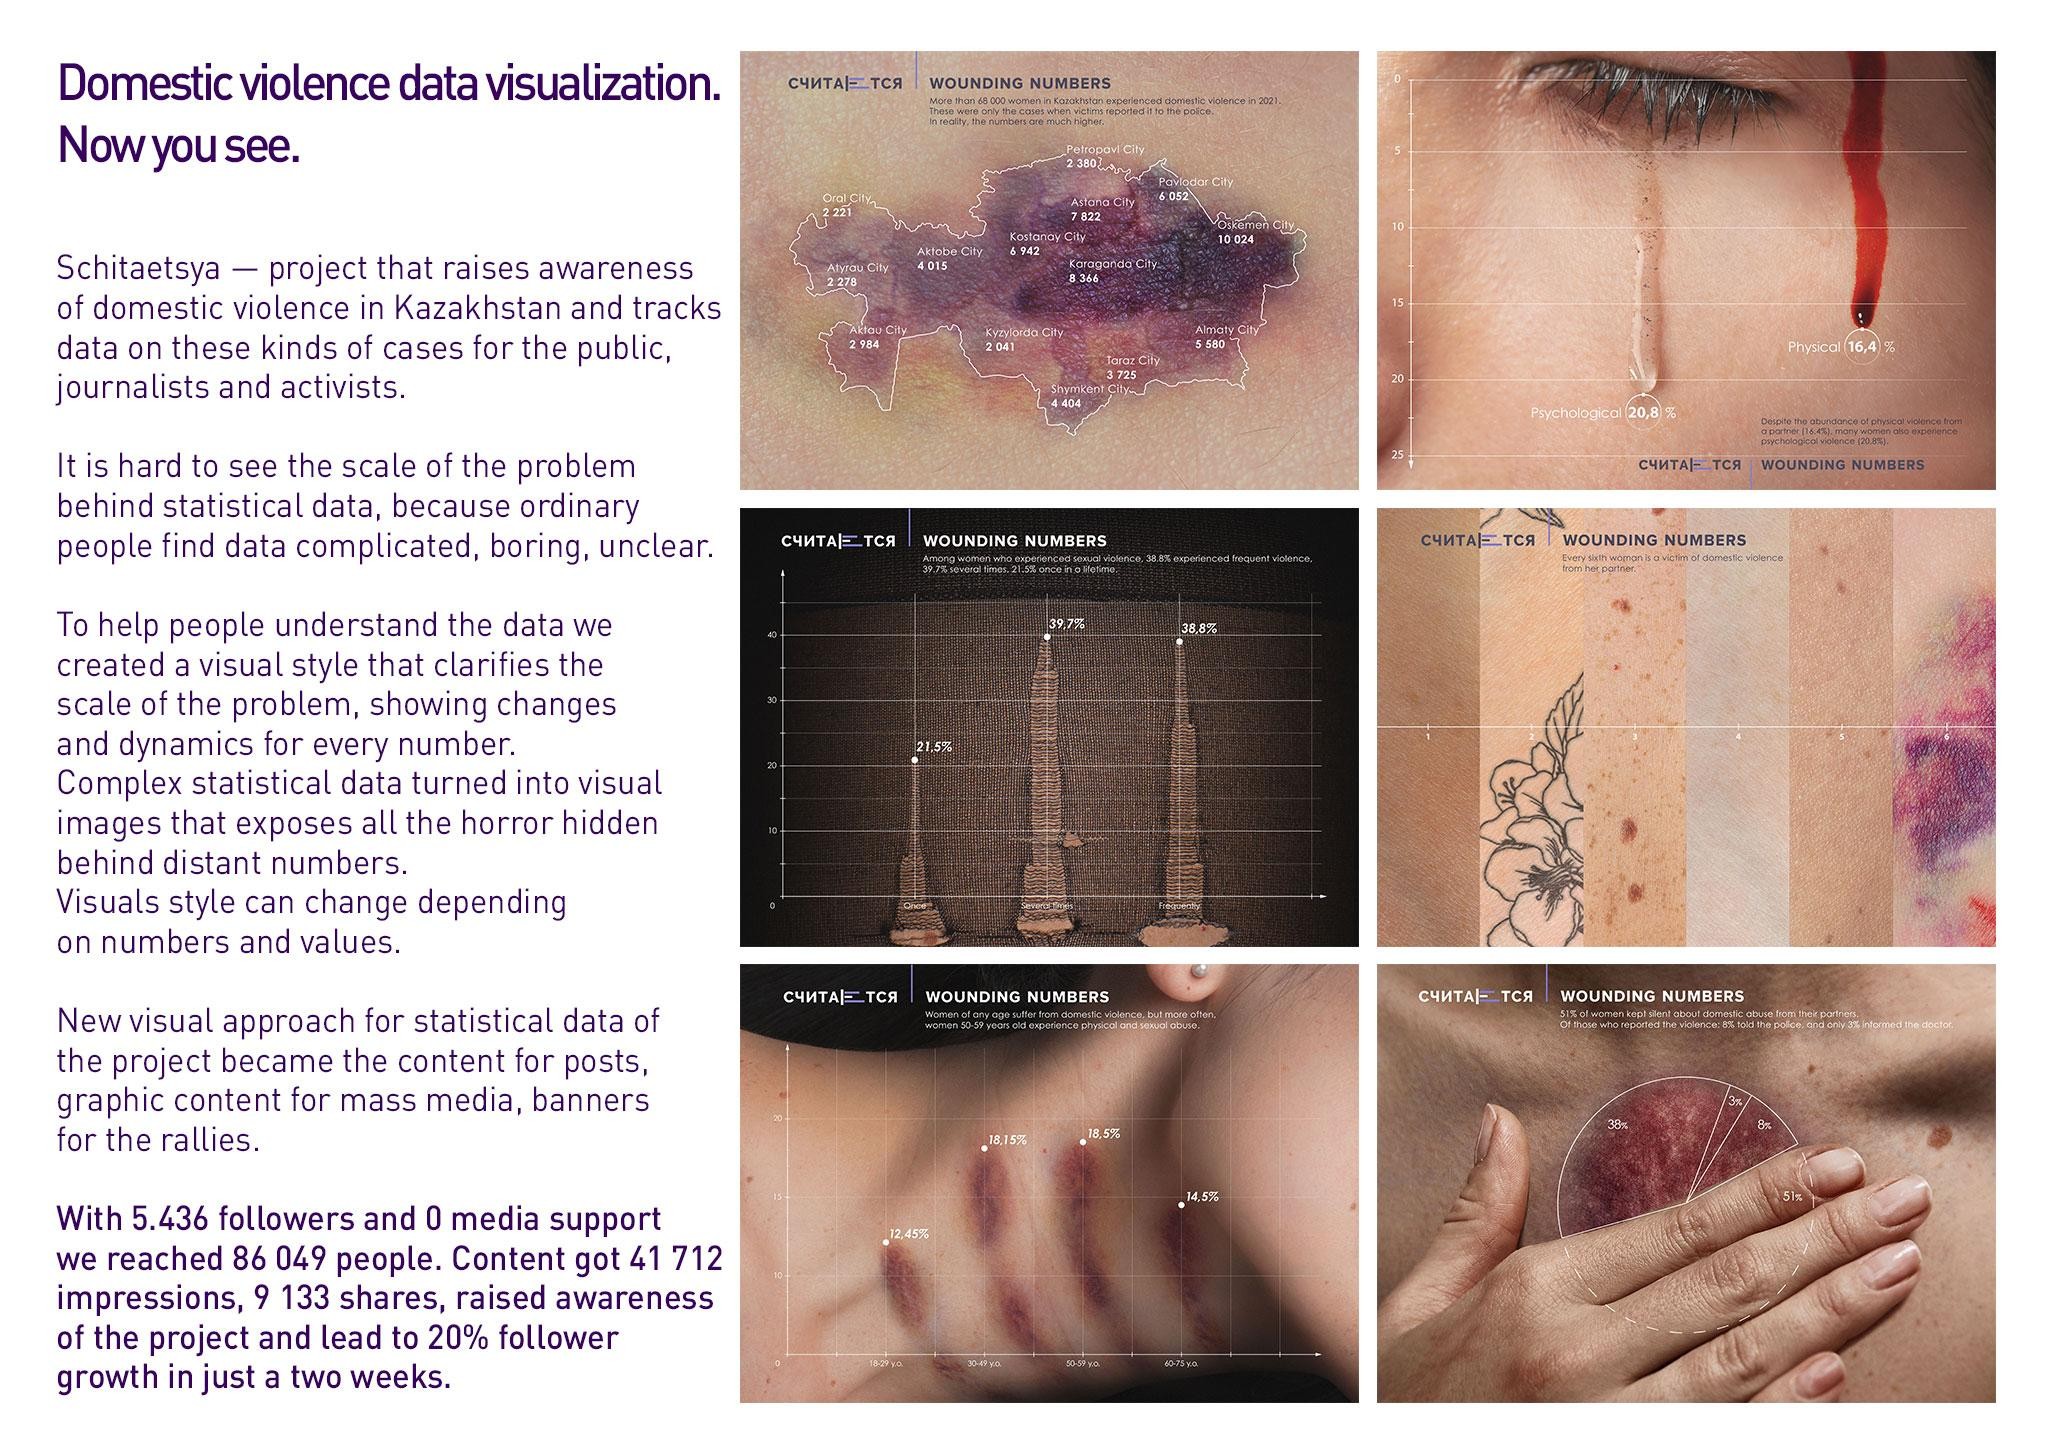 DOMESTIC VIOLENCE DATA VISUALIZATION. NOW YOU SEE.